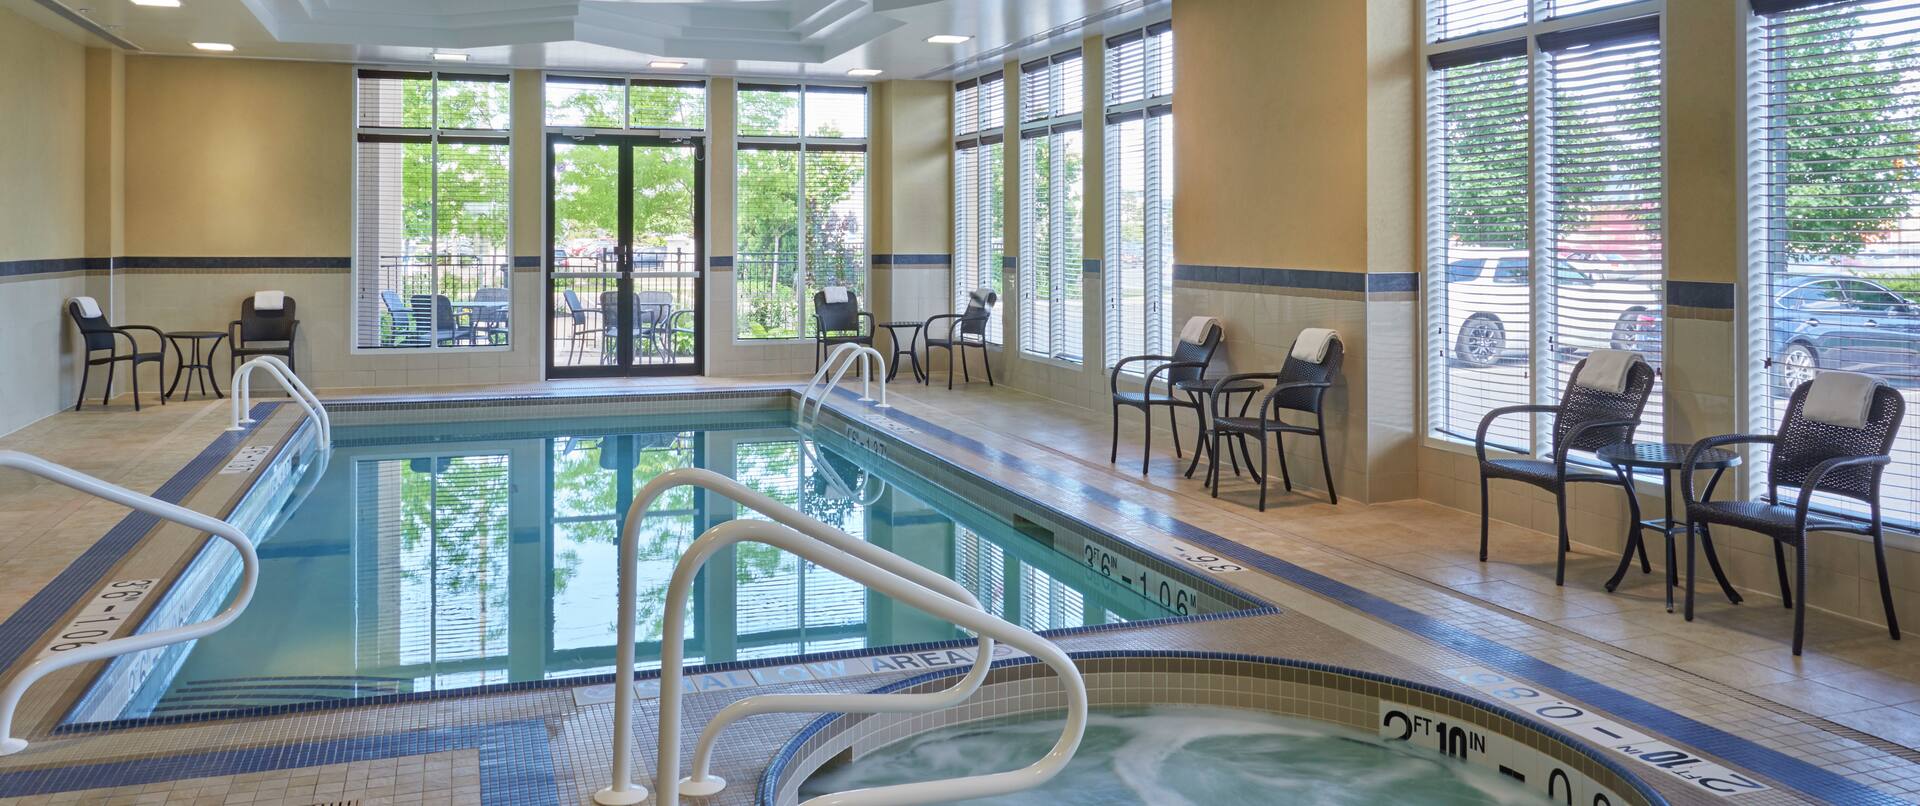 Tables, Chairs, and Windows by Heated Indoor Pool and Whirlpool.